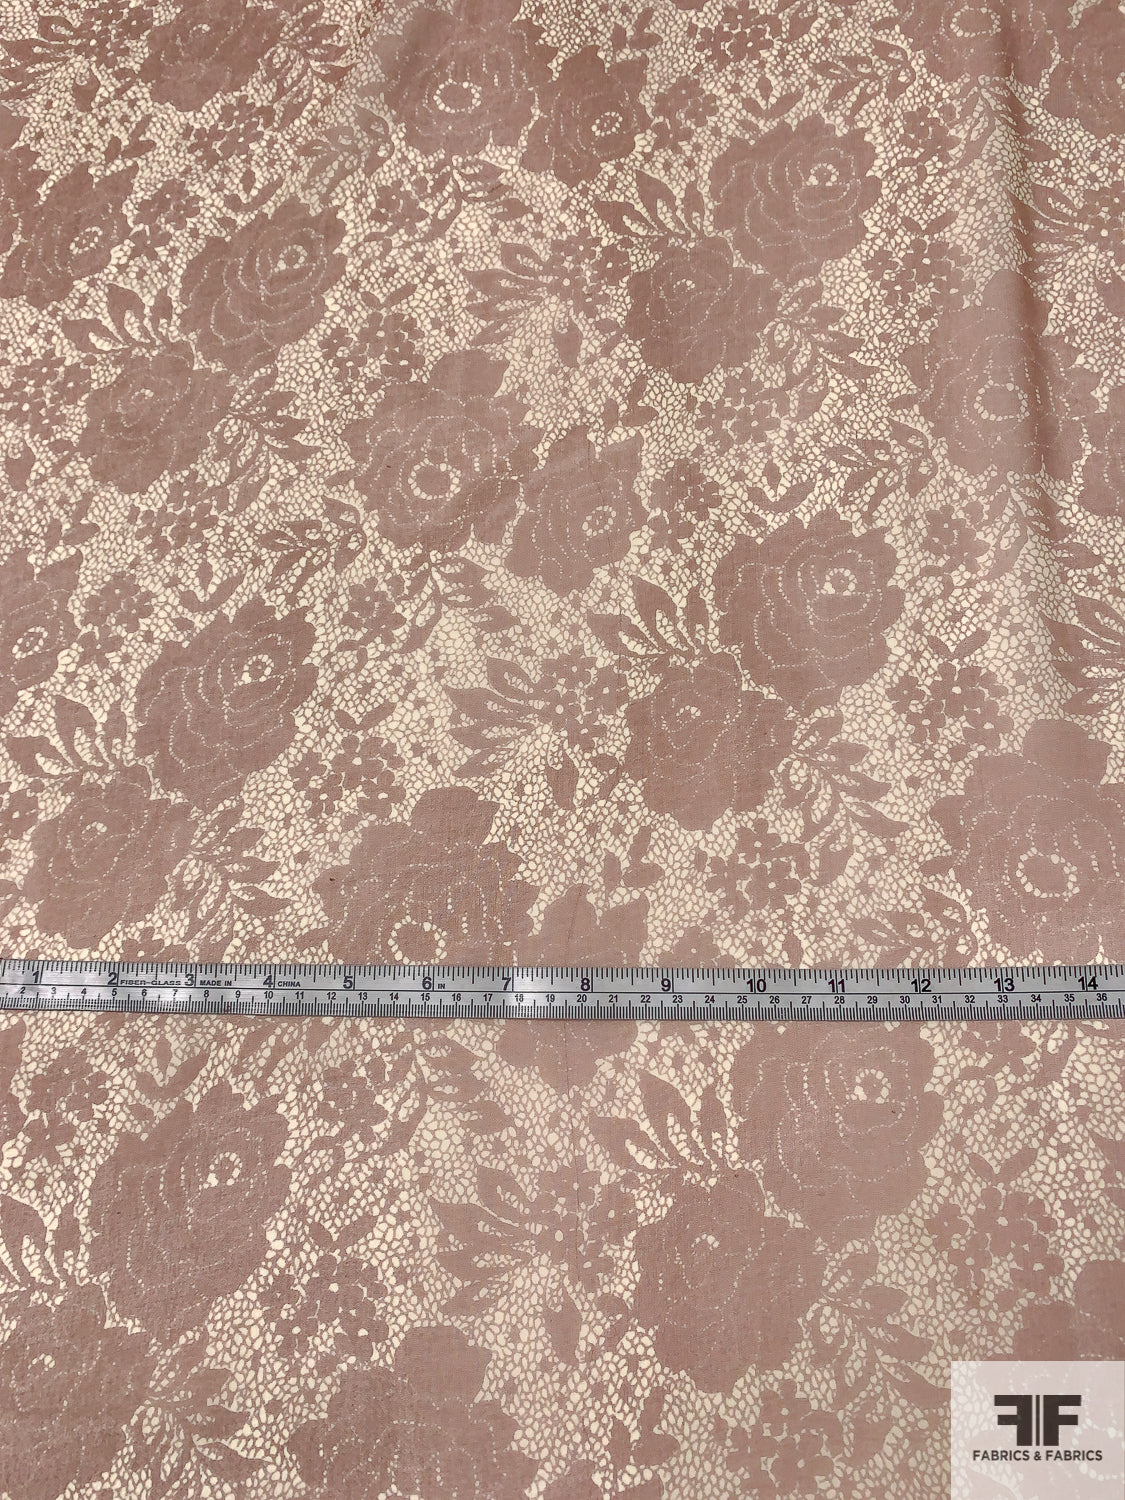 Lace-Look Floral Silhouette Printed Silk Chiffon - Soft Brown / Cream